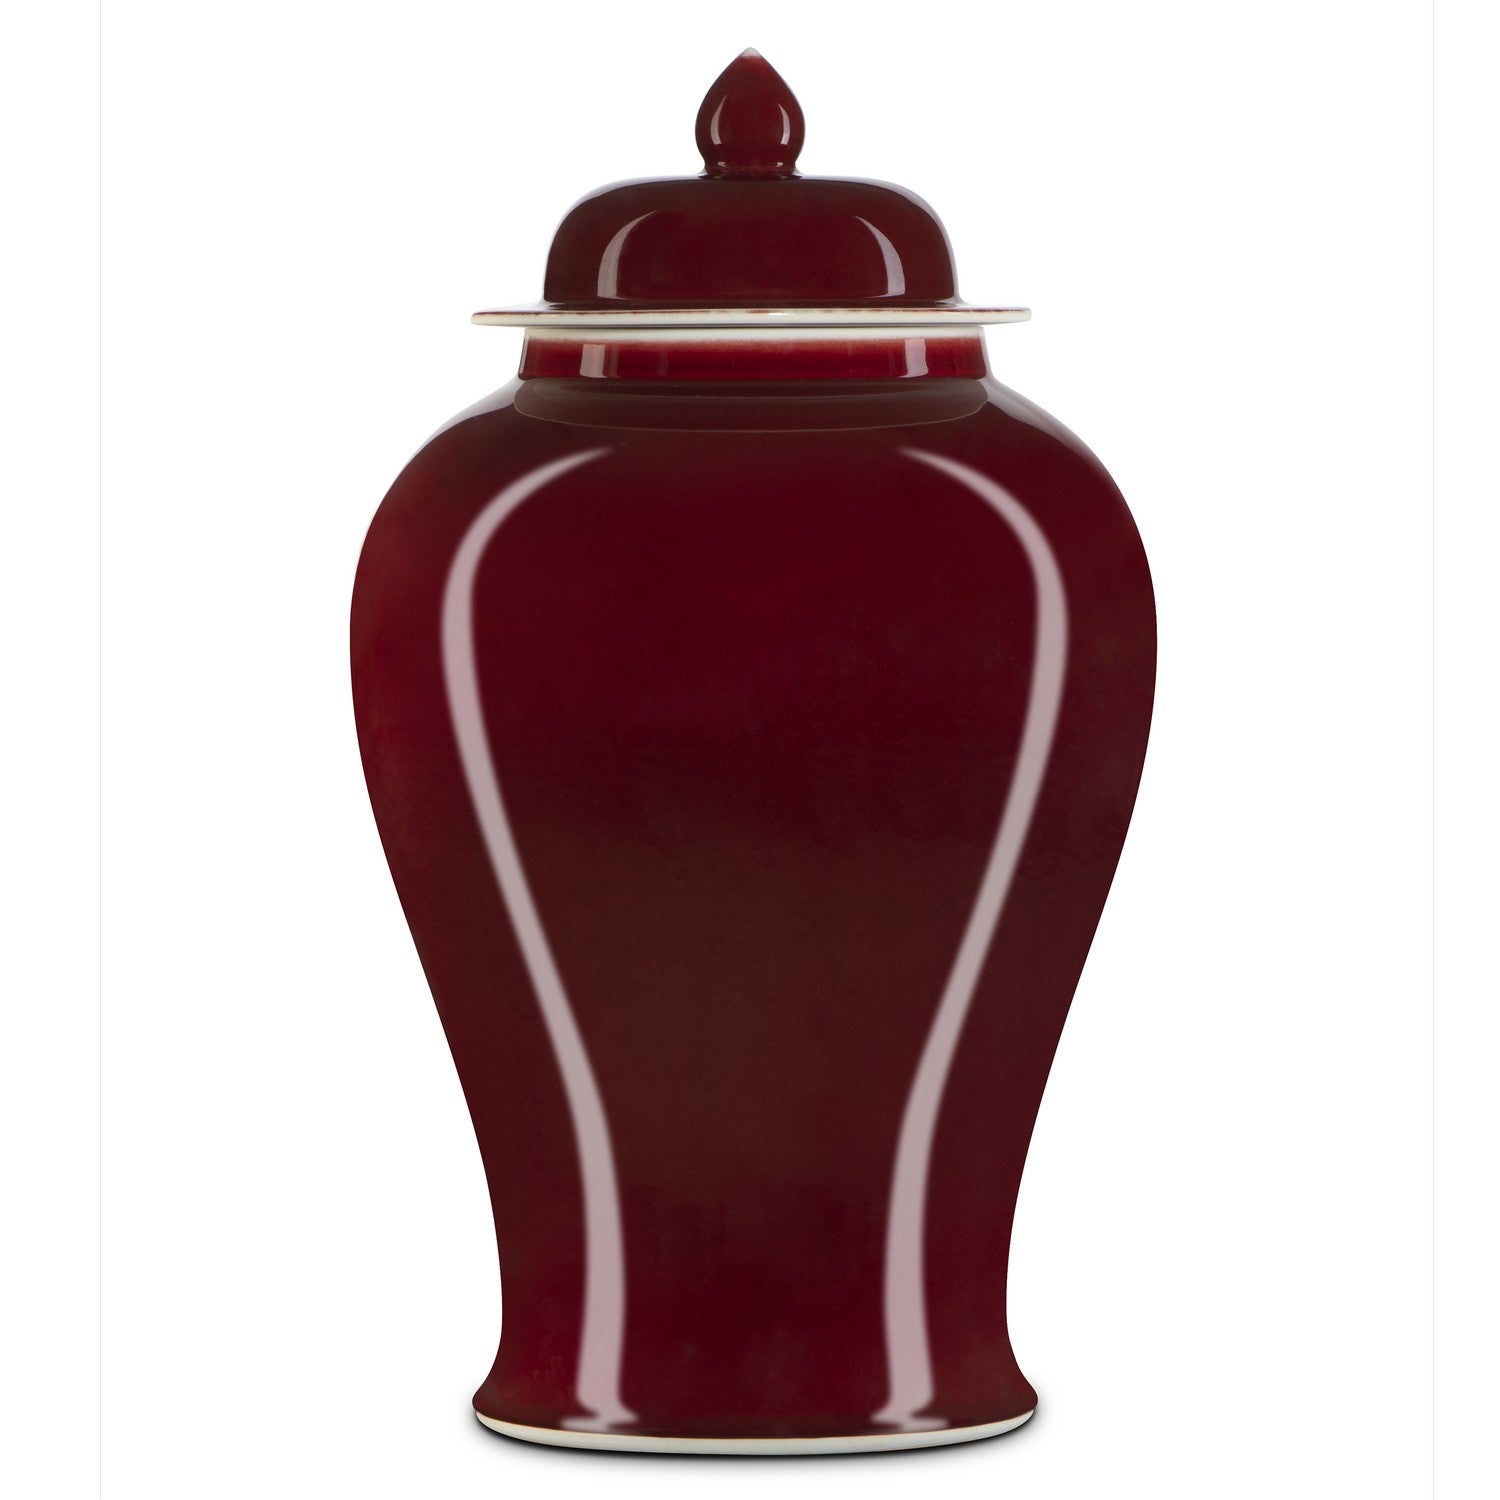 Currey and Company - 1200-0686 - Jar - Imperial Red